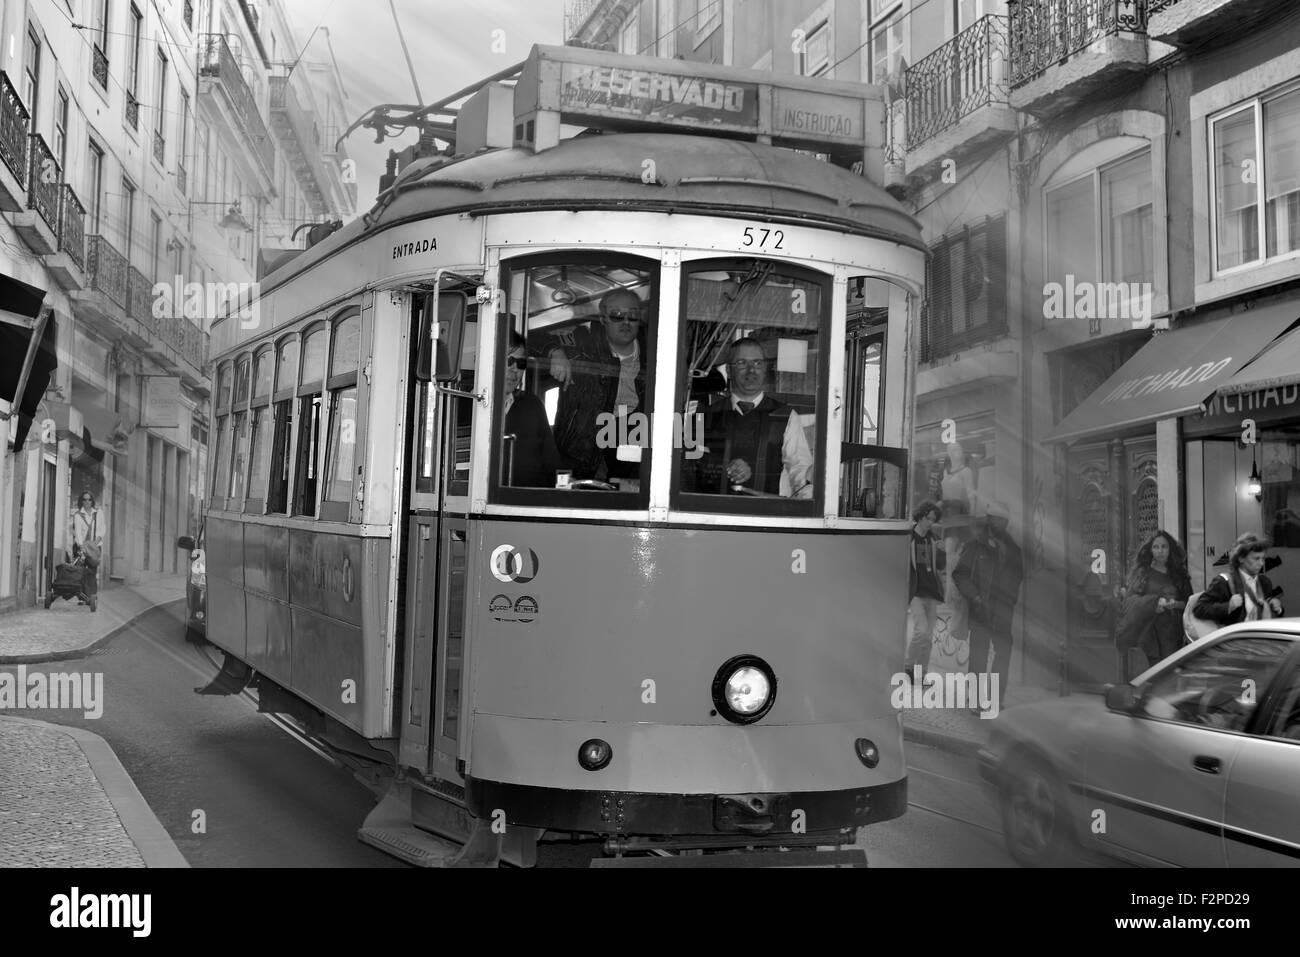 Portugal: Historic tram moving through the alleys of Bairro Alto in Lisbon Stock Photo